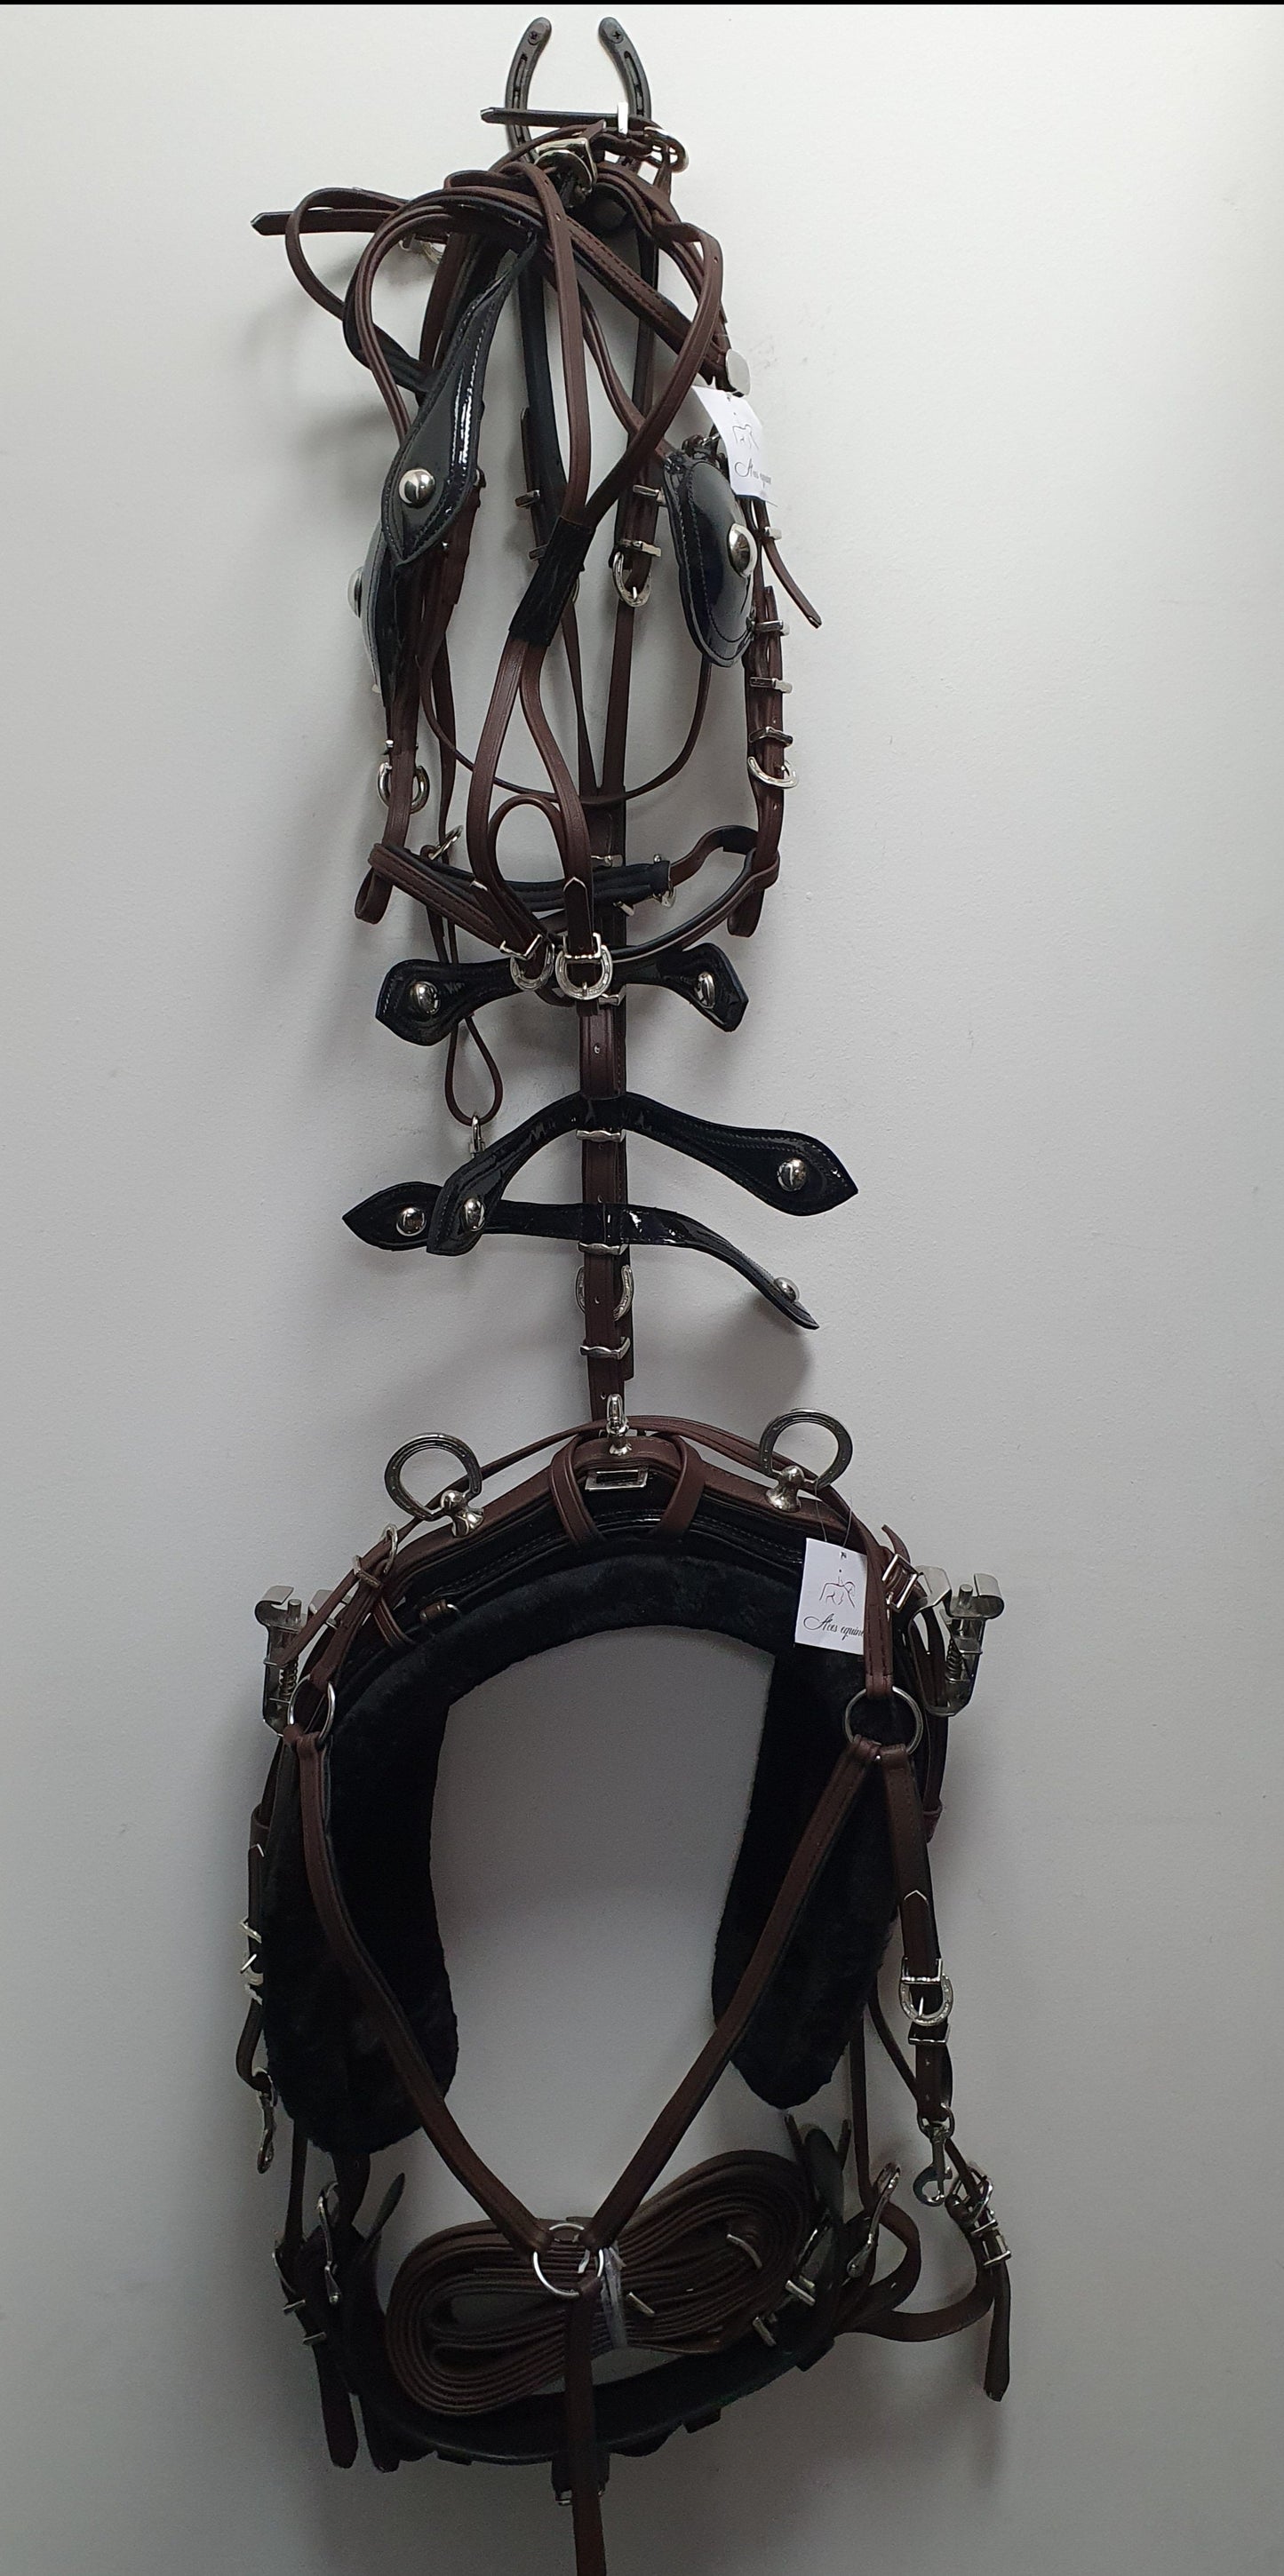 Quick Hitch Harness with Horse shoe fitting Brown and Black